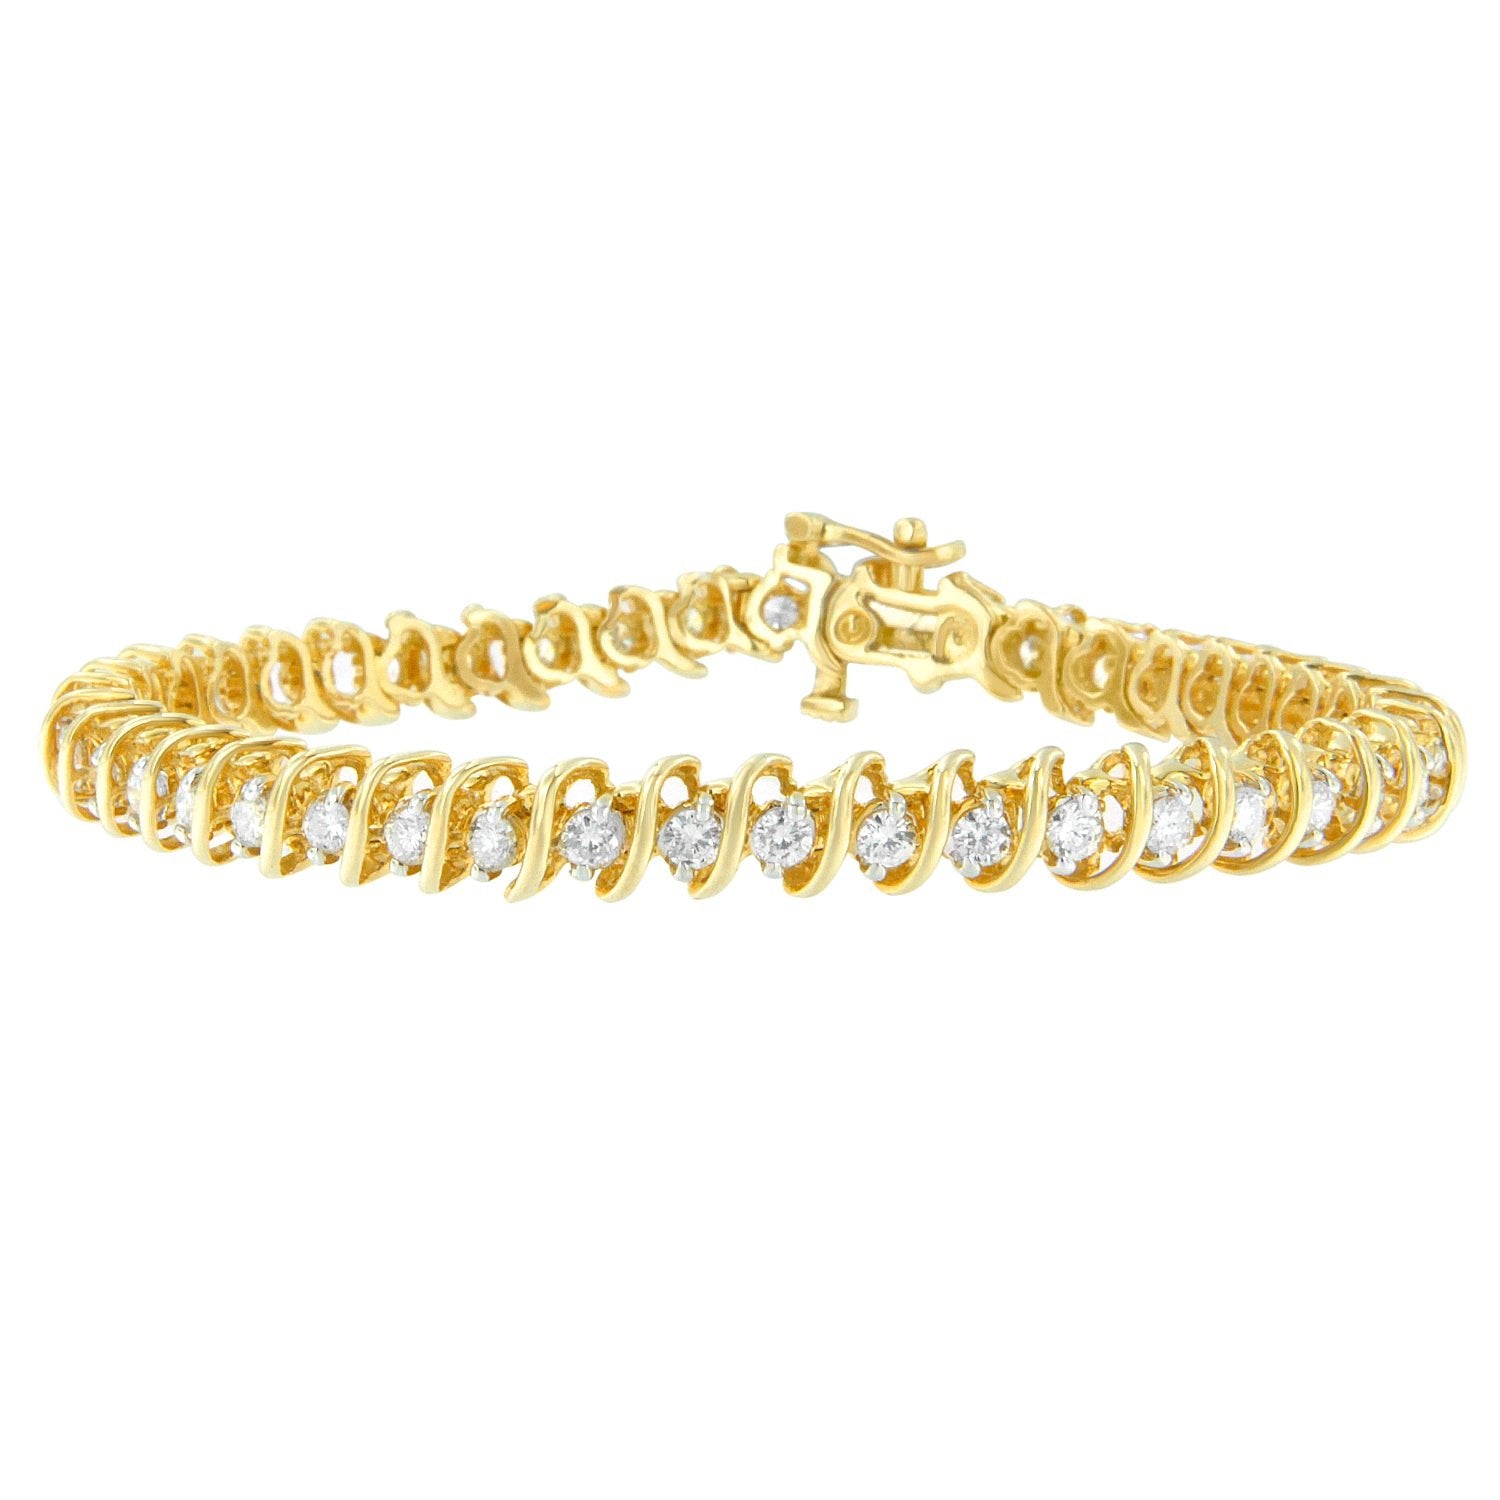 14K Yellow Gold Round Cut Diamond Spiral Link Bracelet (3.00 cttw, H-I Color, SI2-I1 Clarity) - LinkagejewelrydesignLinkagejewelrydesign